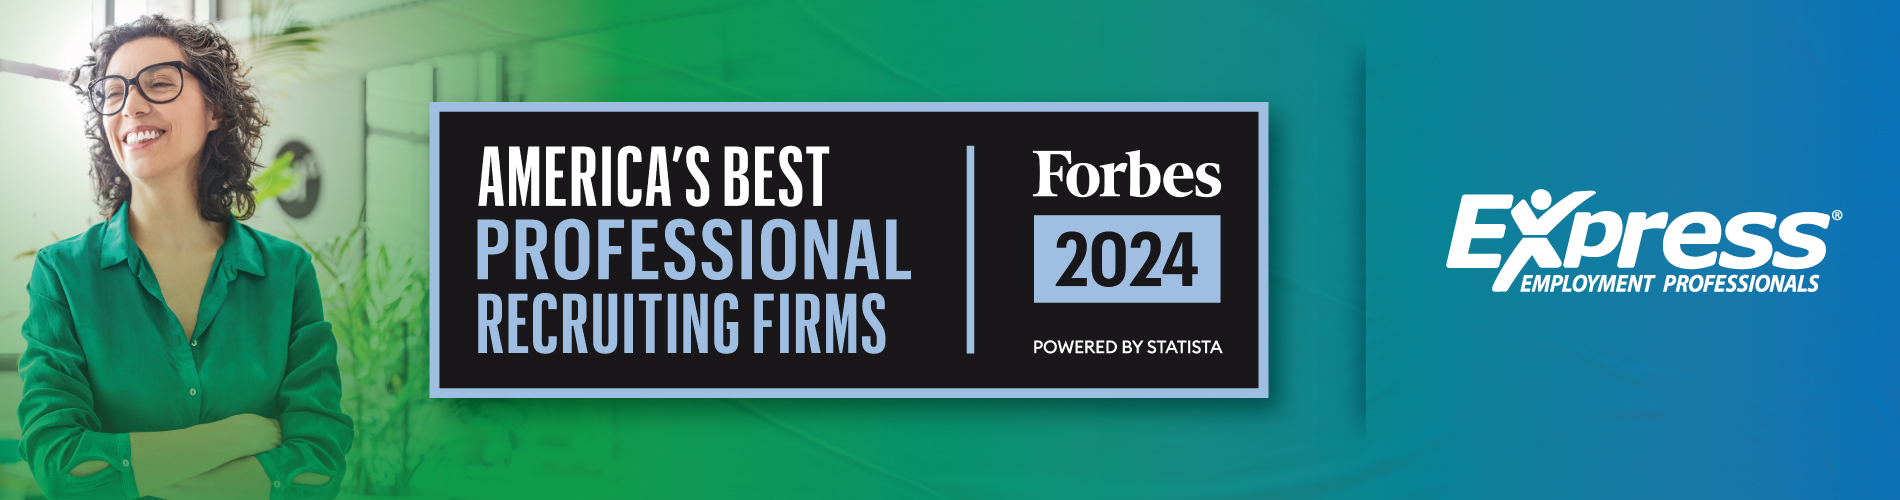 Forbes-Best-Pro-EEP-2024